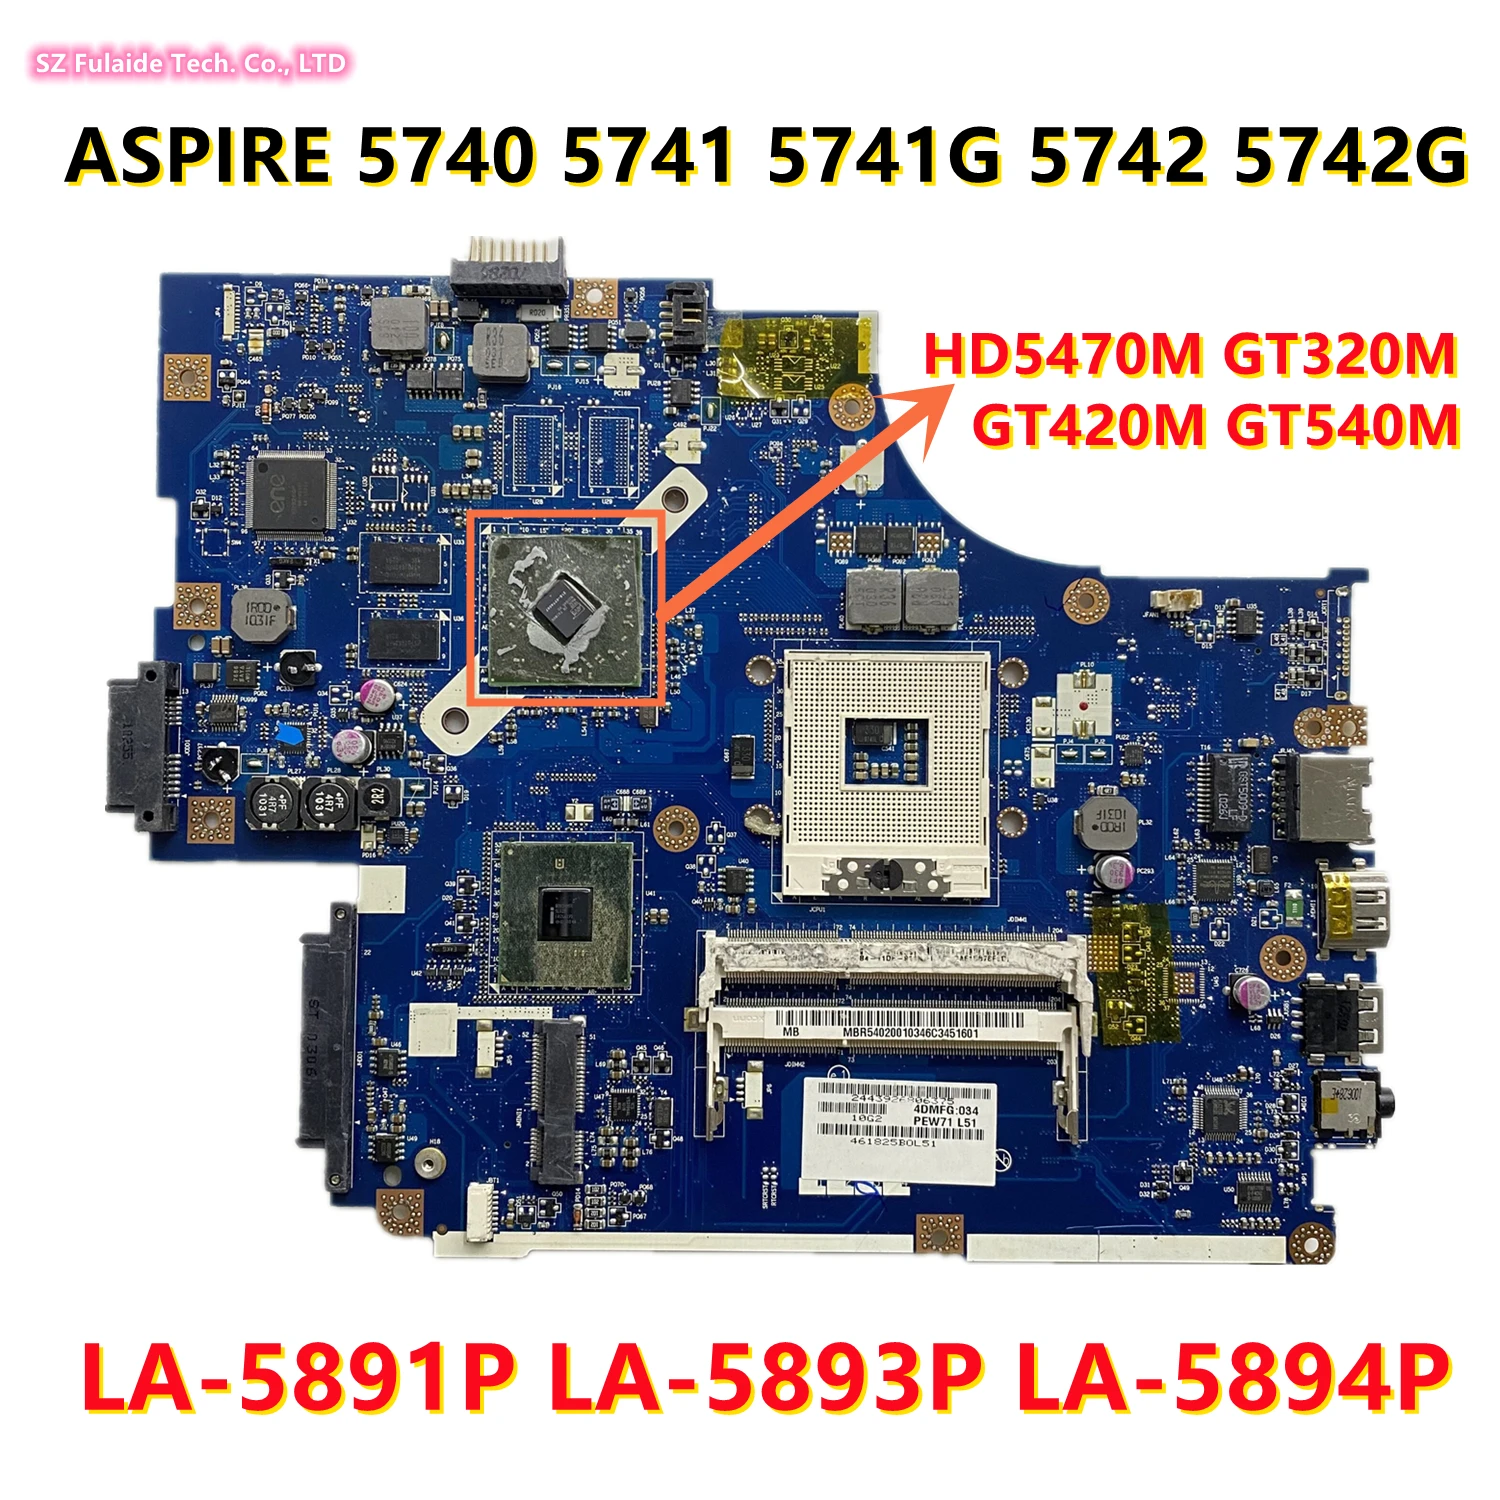 NEW70 LA-5891P LA-5893P LA-5894P For Acer ASPIRE 5740 5741 5741G 5742 5742G Laptop Motherboard With HD5470M GT320M GT420M GT540M